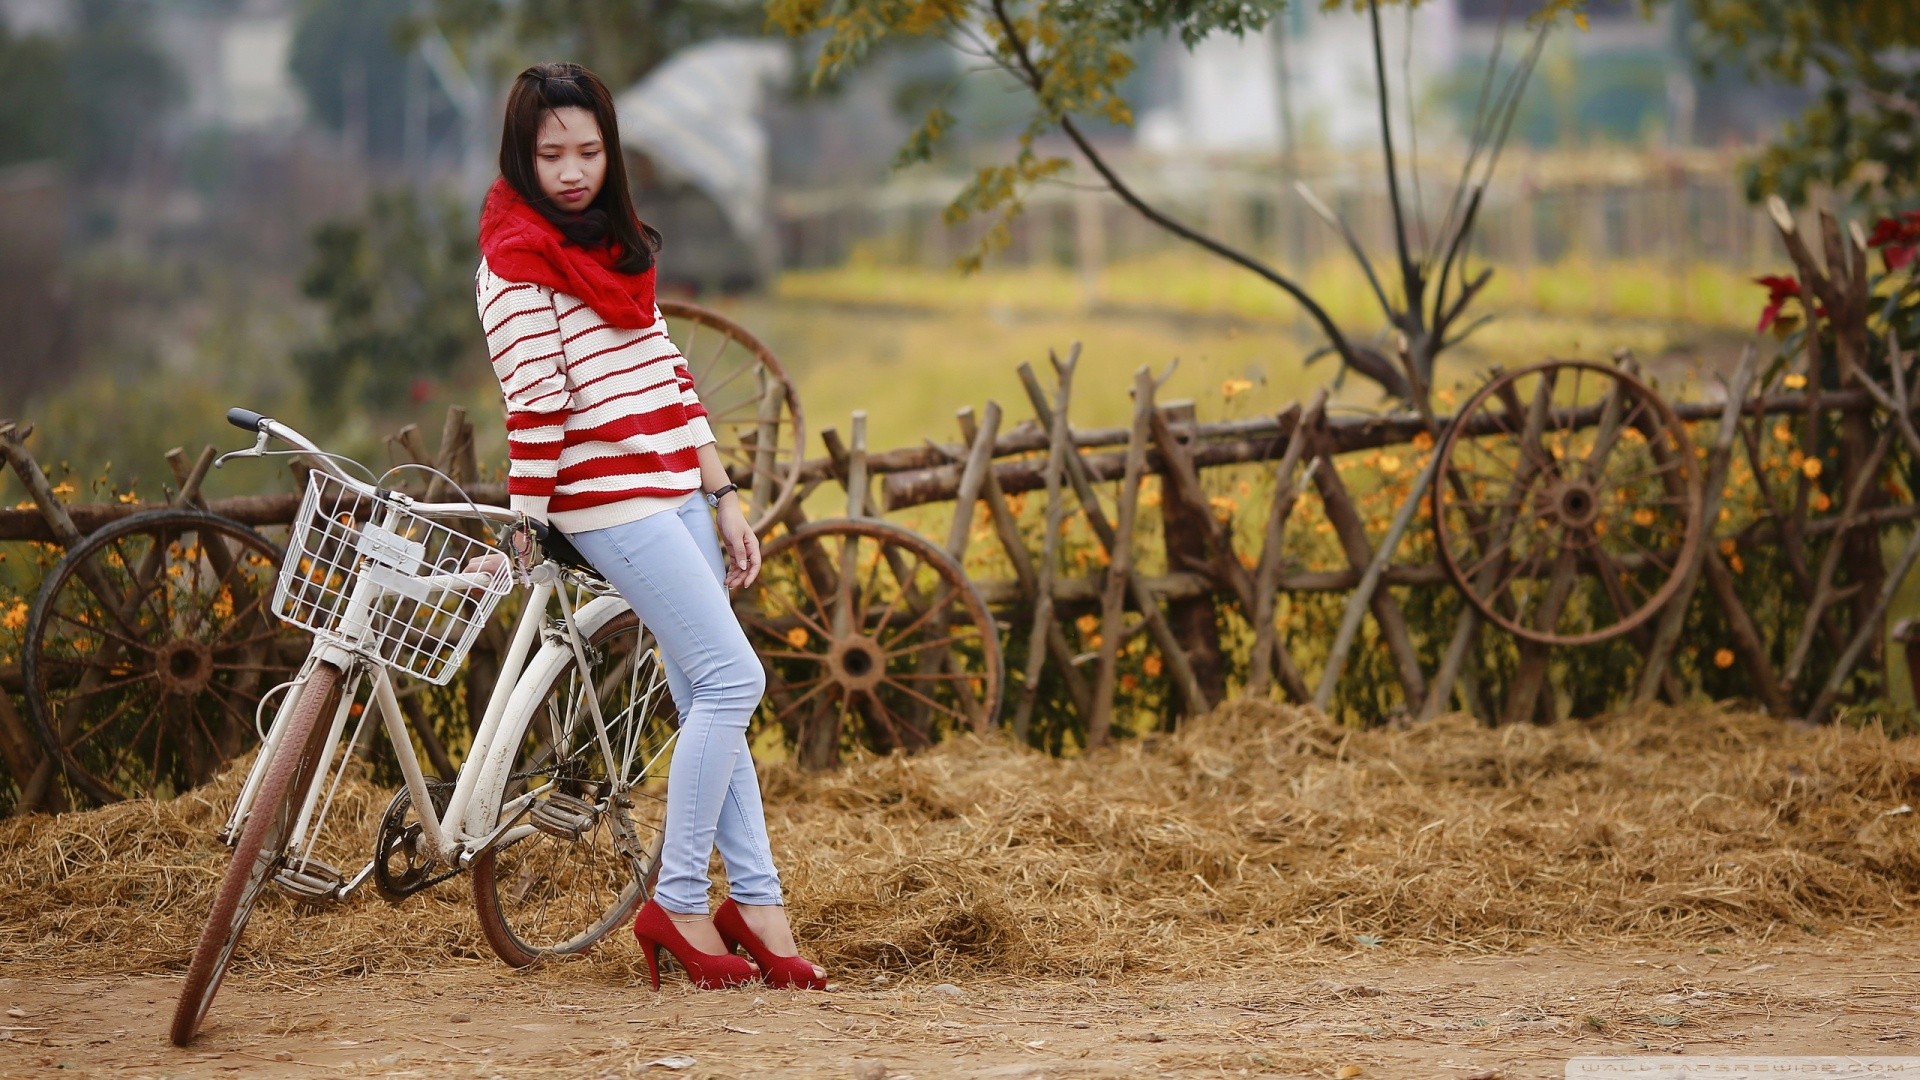 People 1920x1080 women Asian bicycle women with bicycles striped clothing heels red heels women outdoors outdoors model looking away